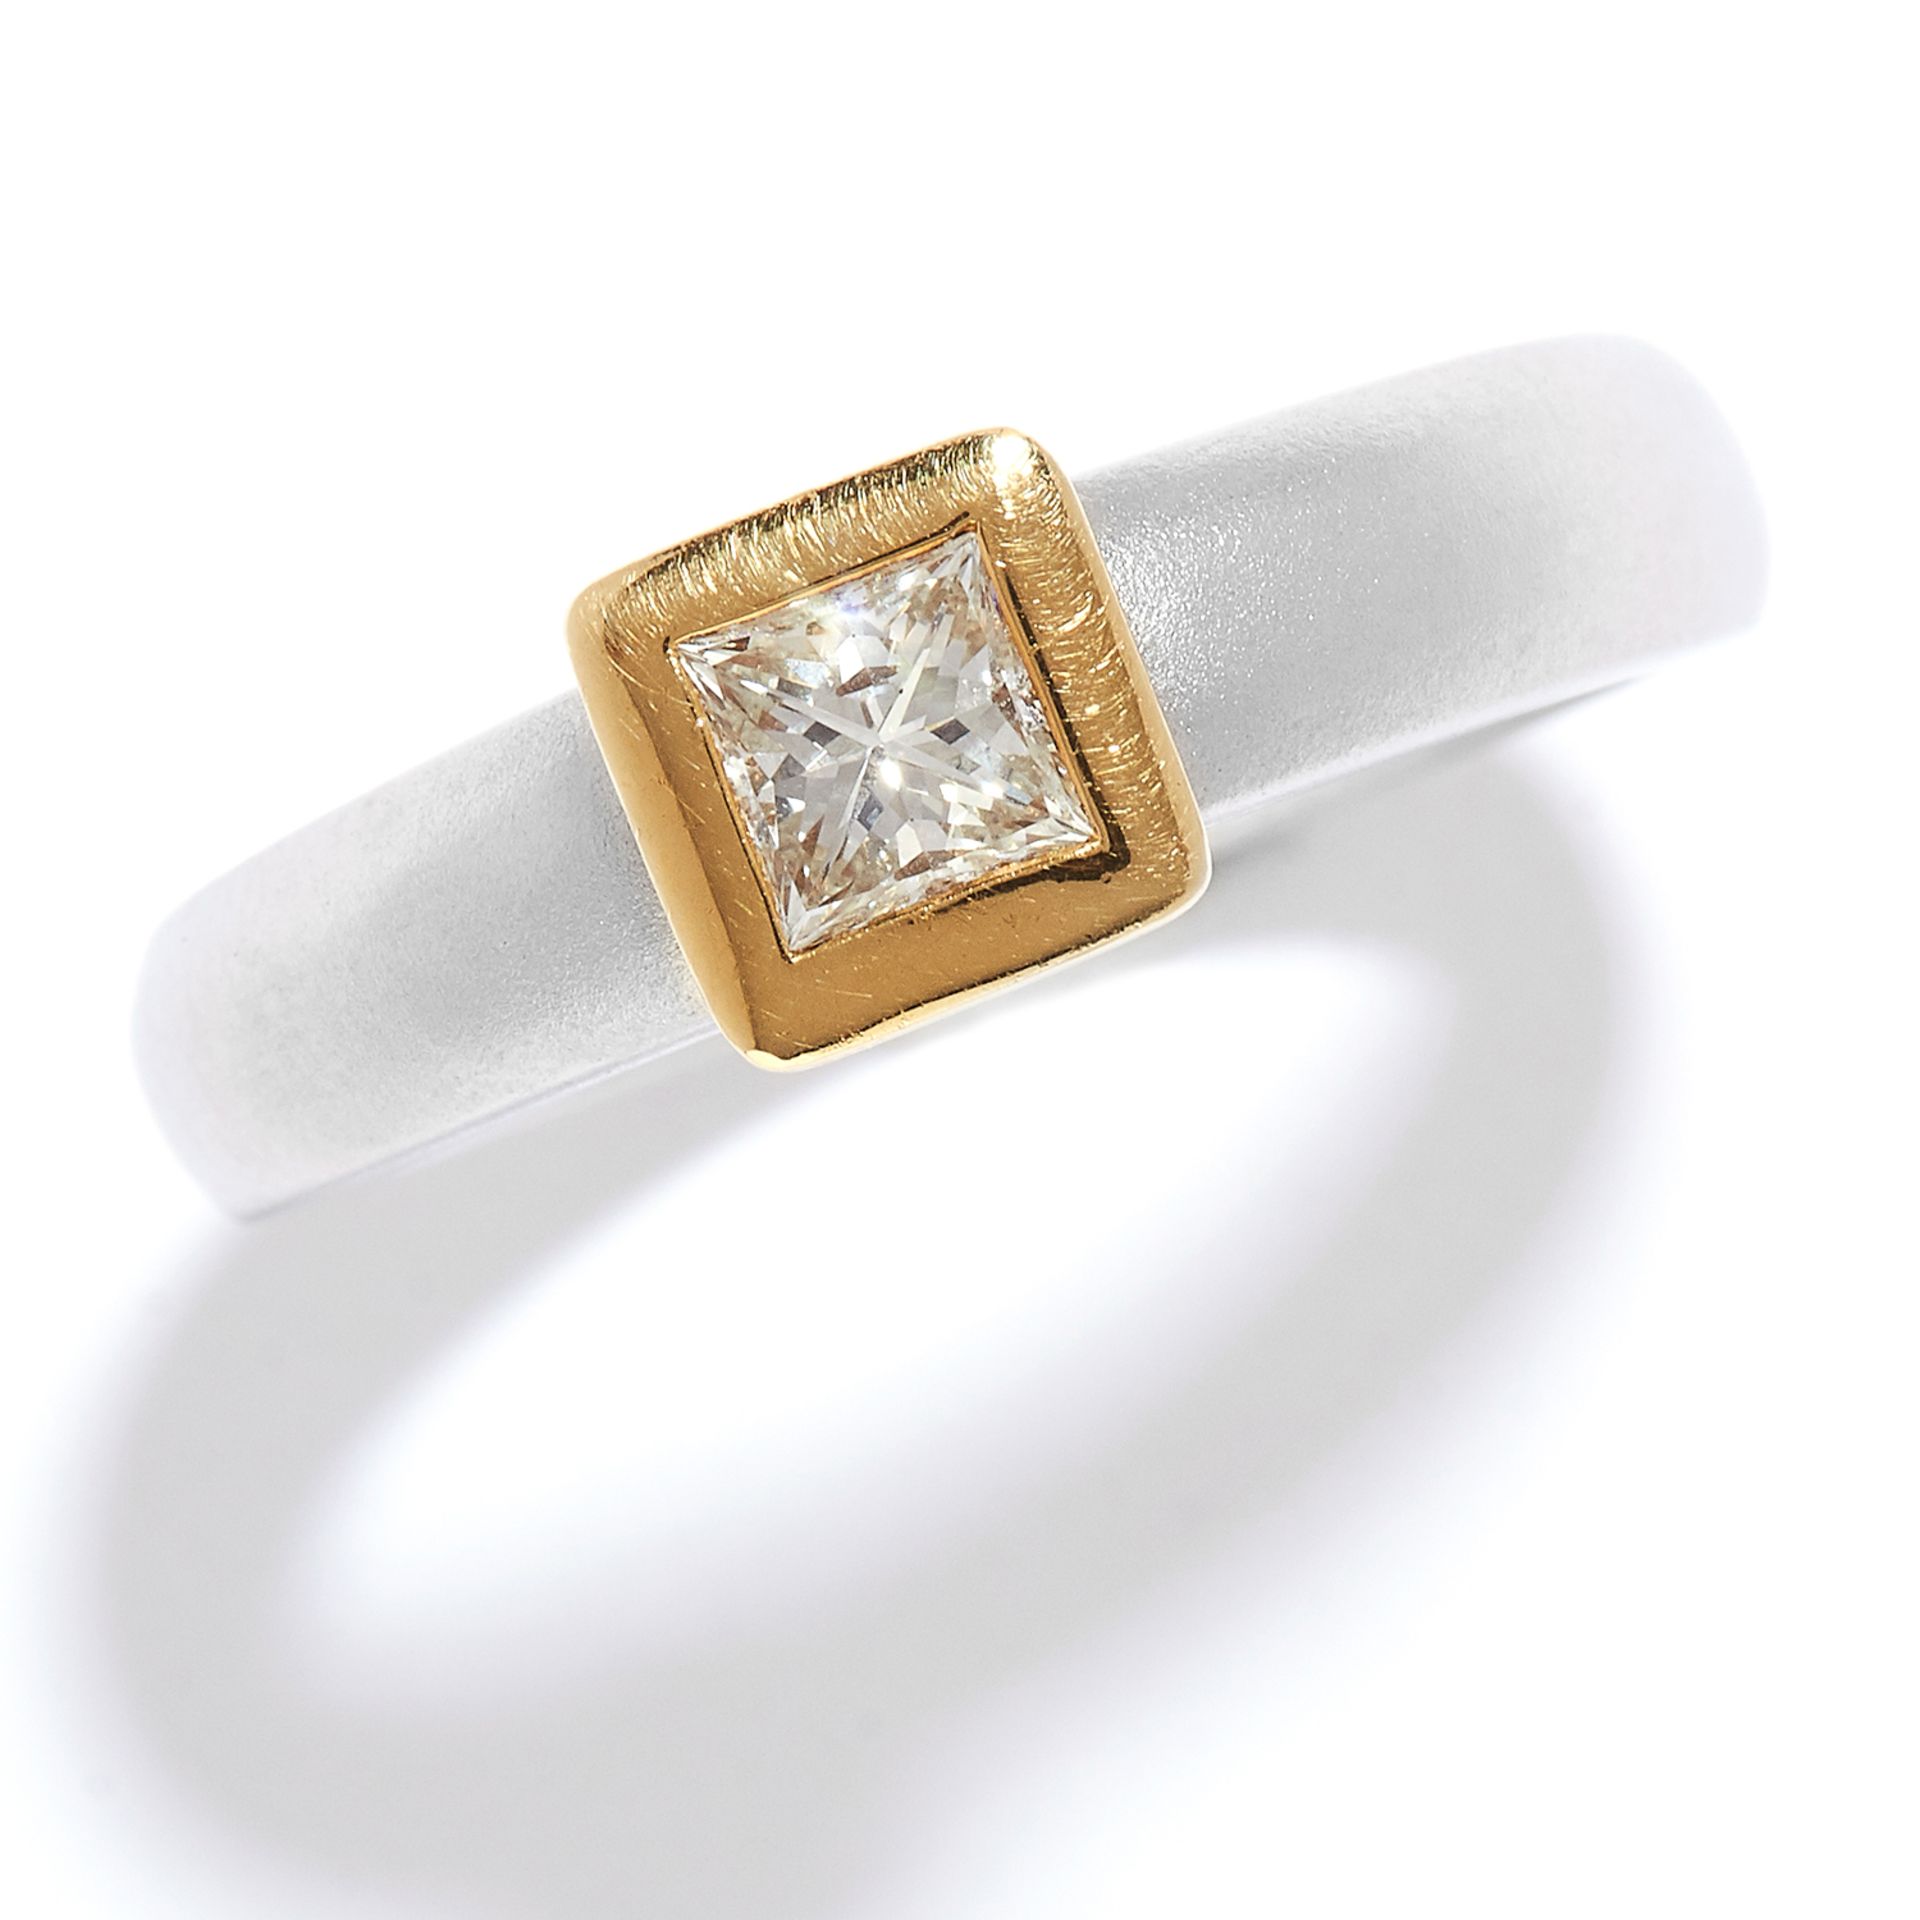 SOLITAIRE DIAMOND ENGAGEMENT RING in 18ct yellow gold and platinum, the princess cut diamond in a